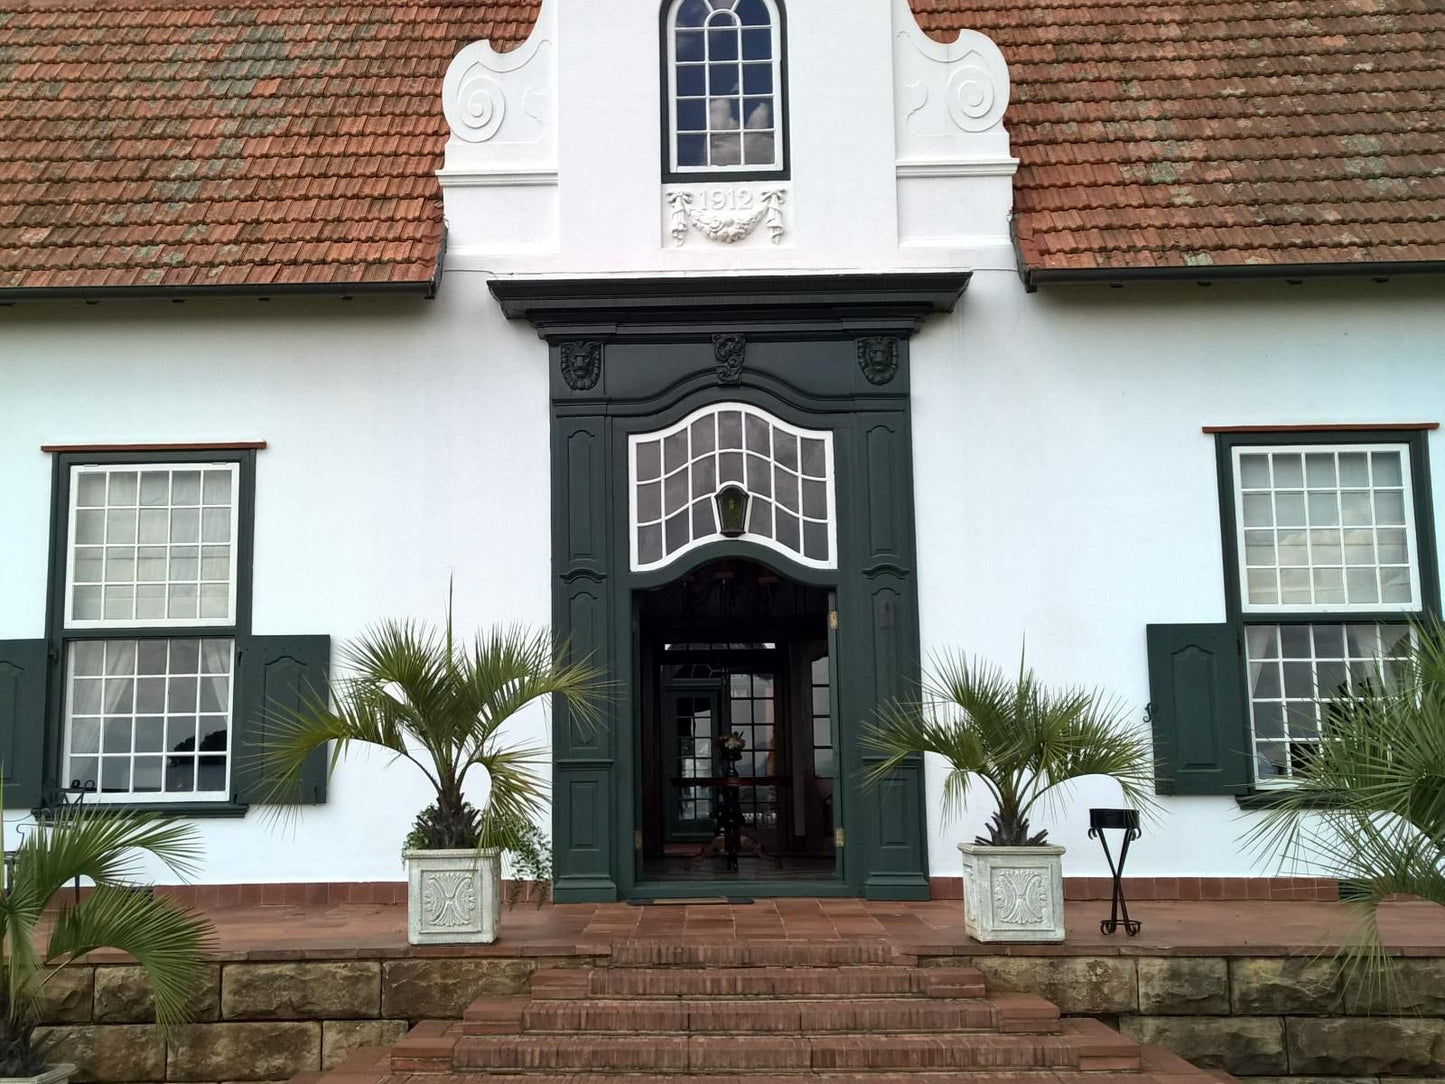 Welgelegen Manor Balfour Mpumalanga South Africa House, Building, Architecture, Church, Religion